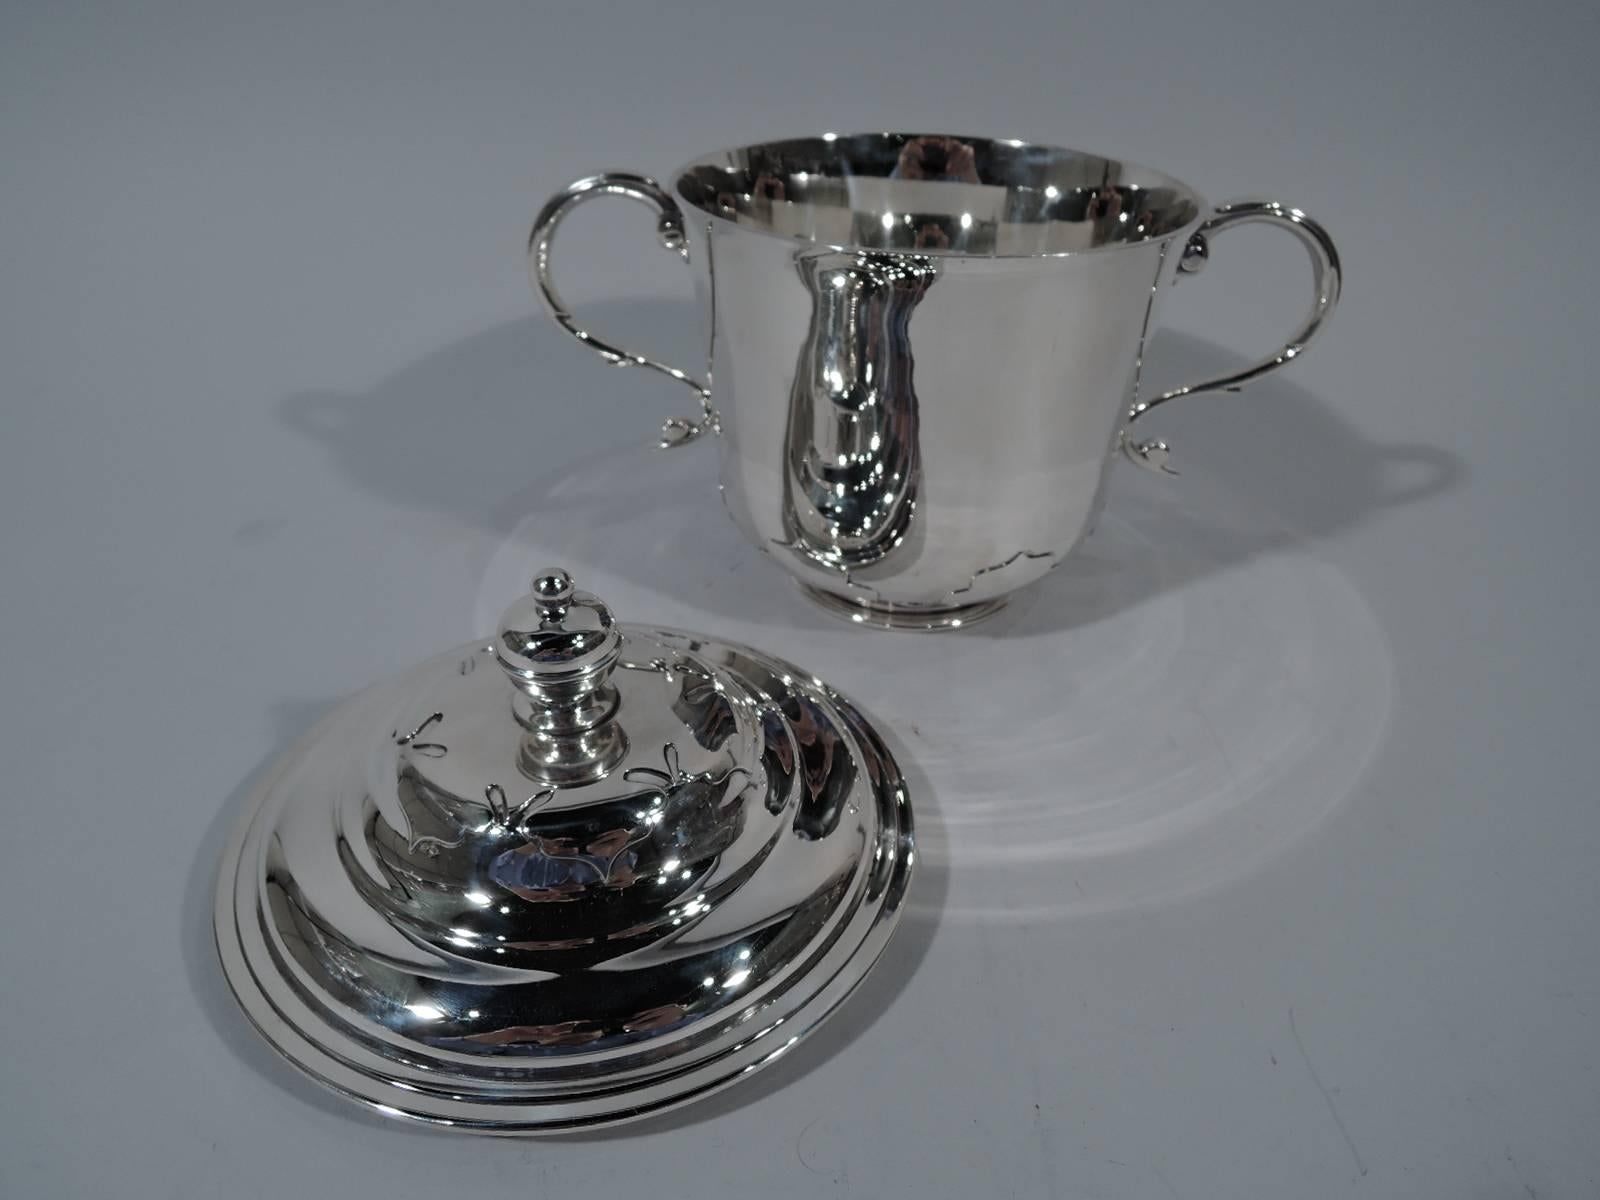 George V sterling silver trophy cup. Made by Daniel & John Wellby in London in 1913. Bowl has flared rim, capped s-scroll side handles, and inset stepped foot. Cover double-domed with vase finial. Cut-out shapes applied to cover and bowl base for a